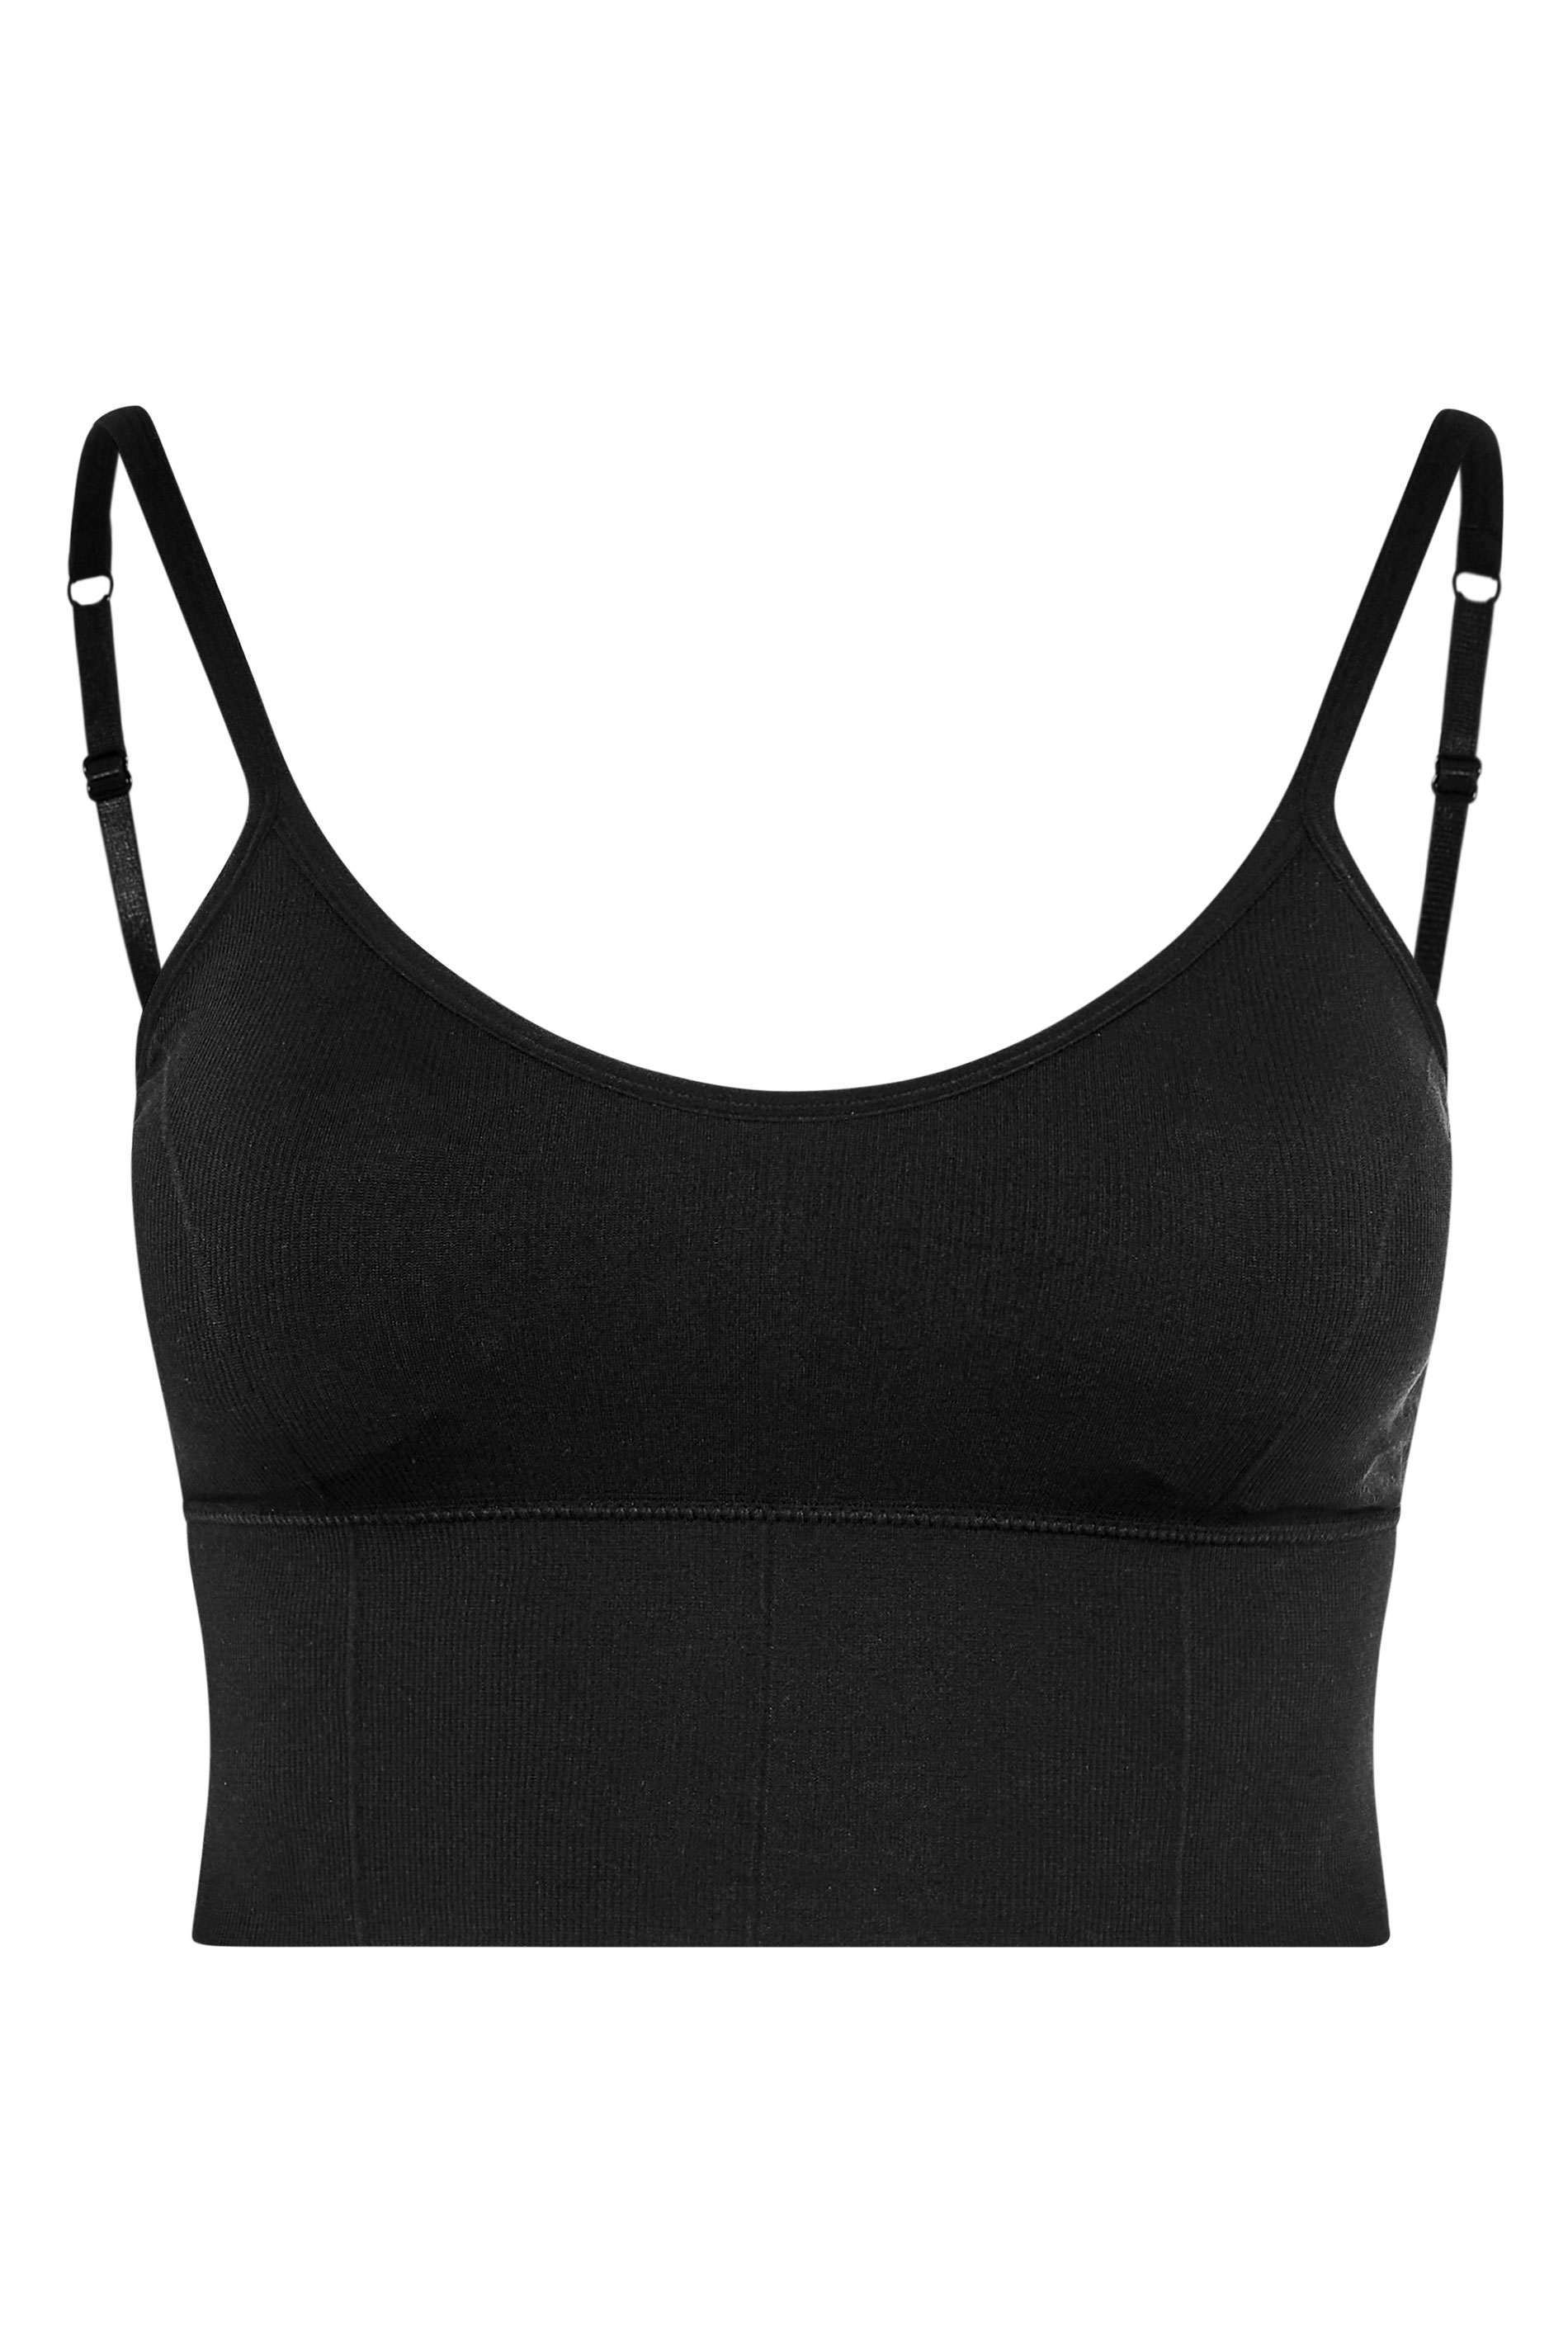 Yours Curve Black Seamless Longline Padded Bralette Top